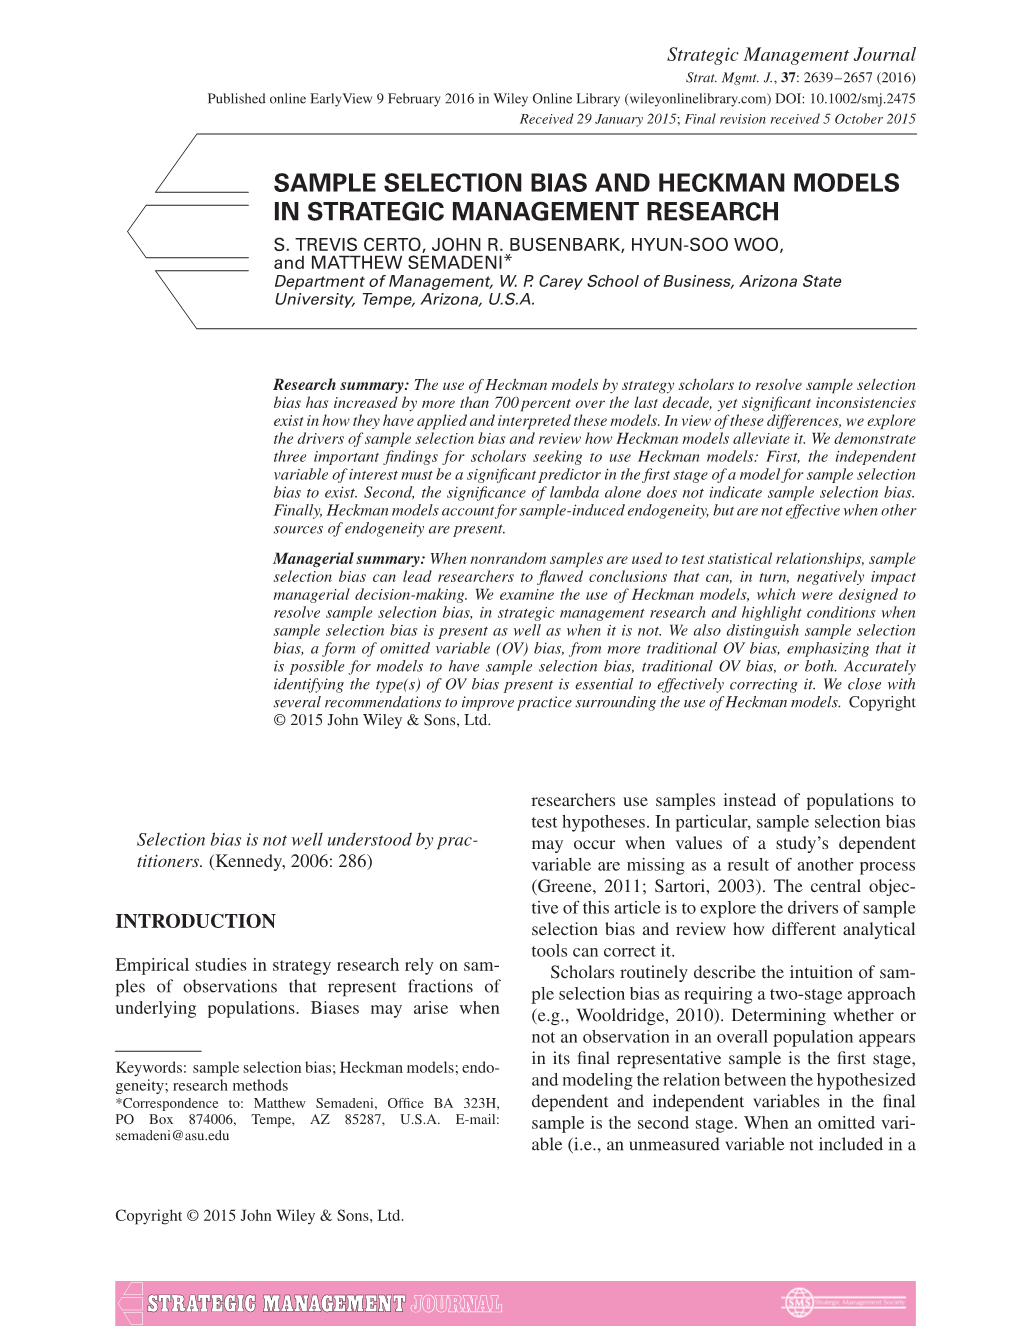 Sample Selection Bias and Heckman Models in Strategic Management Research S